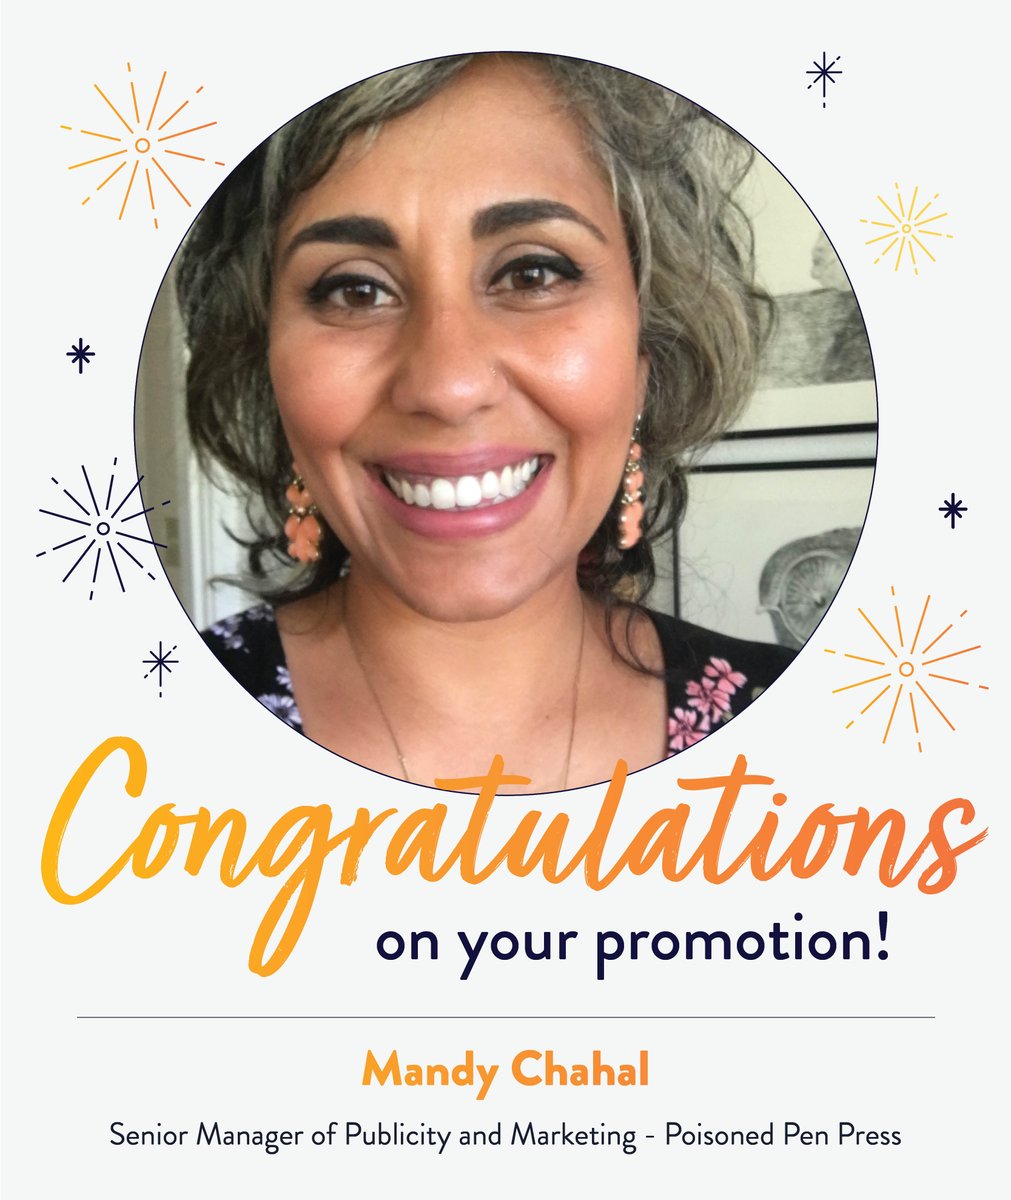 🌞Join us in congratulating Mandy Chahal to Sr. Manager of Publicity & Marketing - Poisoned Pen Press! 📚Mandy uses the utmost skill & care with each of her authors & campaigns, and her kind, collaborative attitude makes her an invaluable part of our Impact Marketing team.